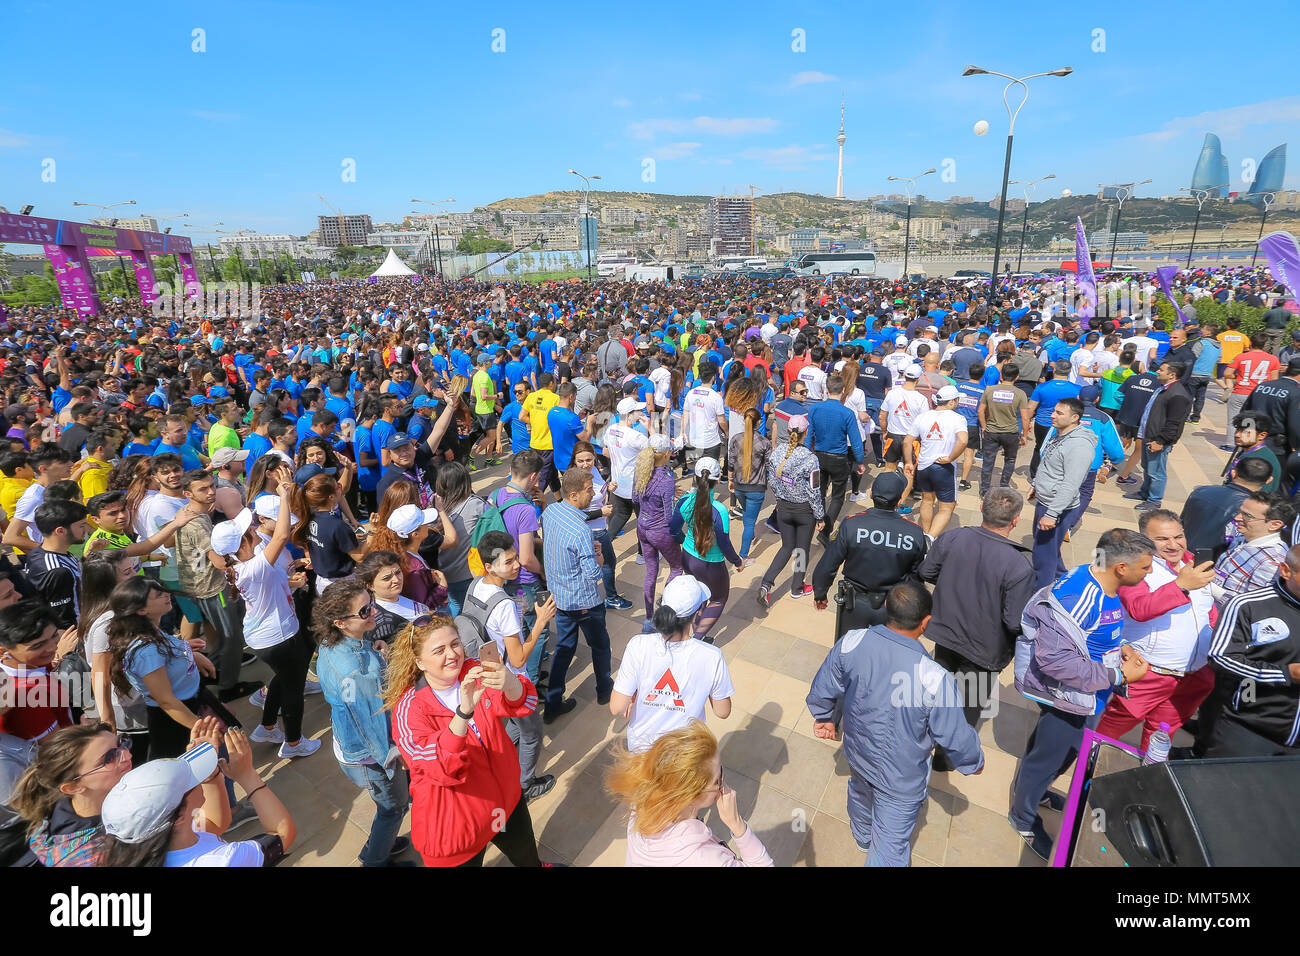 Baku, Azerbaijan. 13th May, 2018. Large group of marathon runners in Baku. May 13, 2018. The semi-marathon was cover a distance of 21 kilometers, starting at the national Flag Square and finishing at Baku Olympic Stadium. This year’s semi-marathon was open to anyone above the age of 16 upon prior registration, and the event got nearly 18,000 registered participants. Credit: Aziz Karimov/Alamy Live News Stock Photo